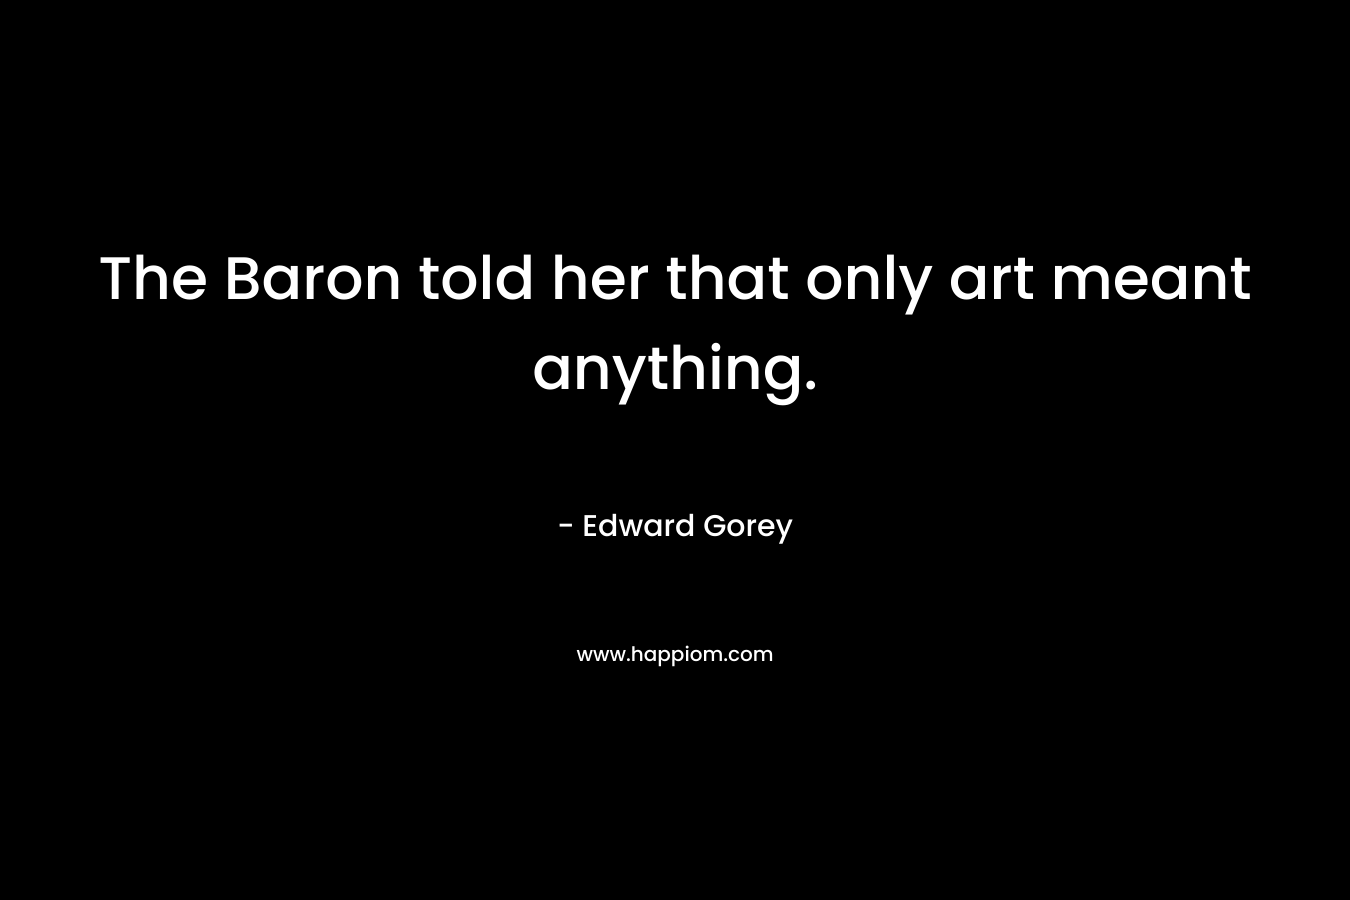 The Baron told her that only art meant anything. – Edward Gorey